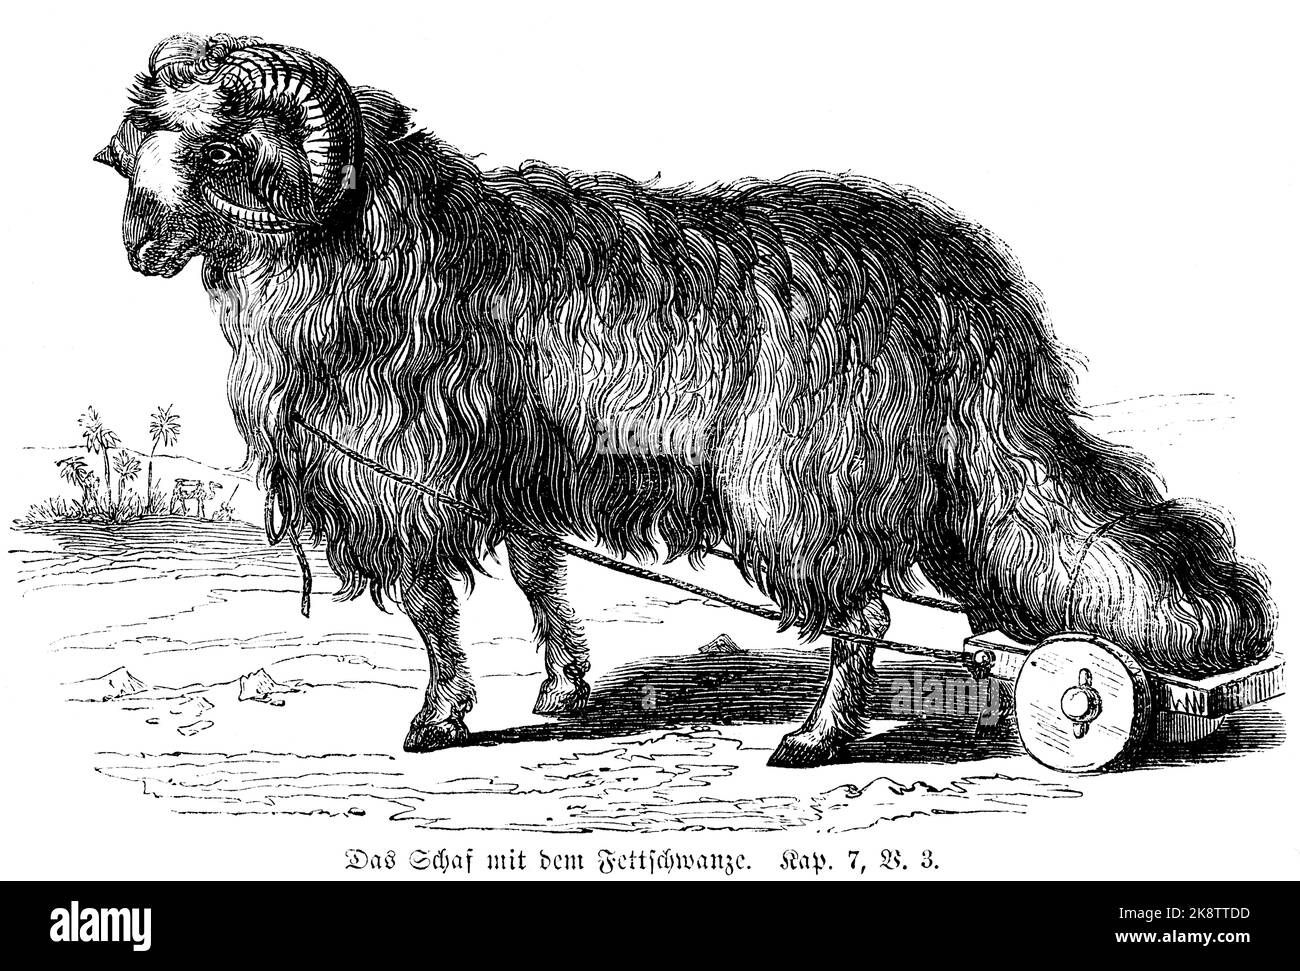 The fat-tailed sheep, Third Book of Moses Chapter 7, Verse 3, bible, historic illustration 1850, Stock Photo